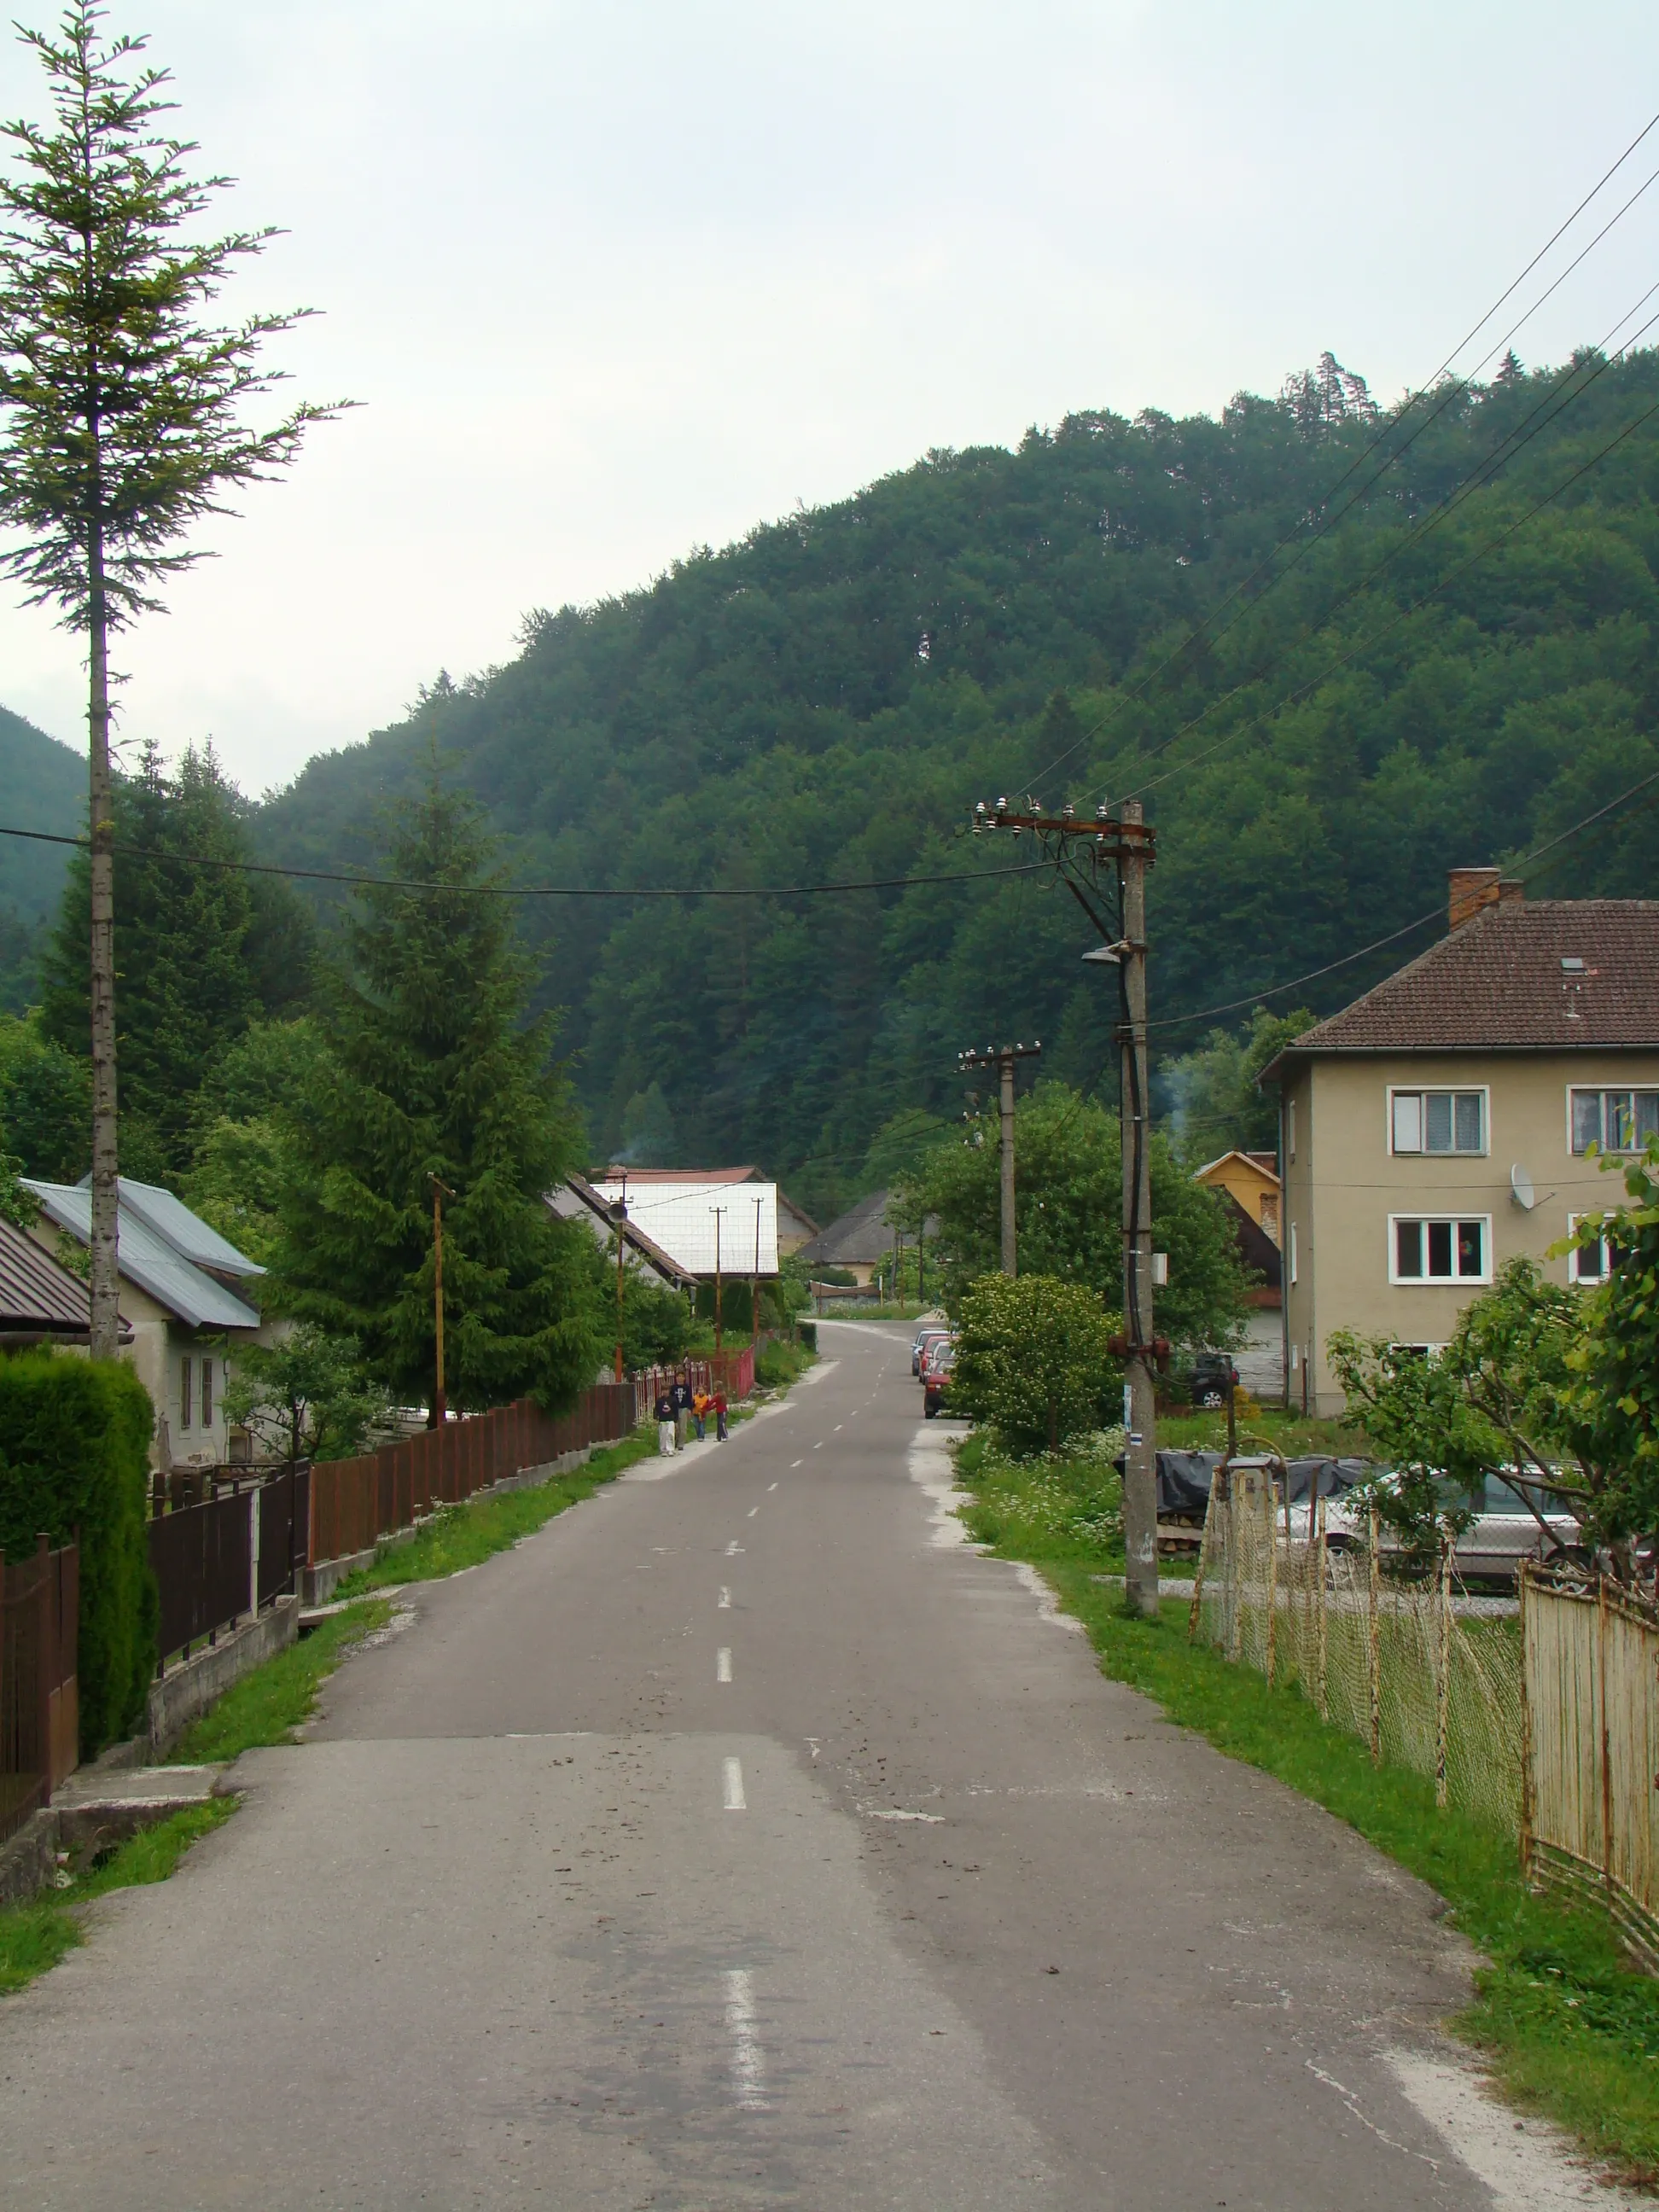 Photo showing: the main street in Gapel